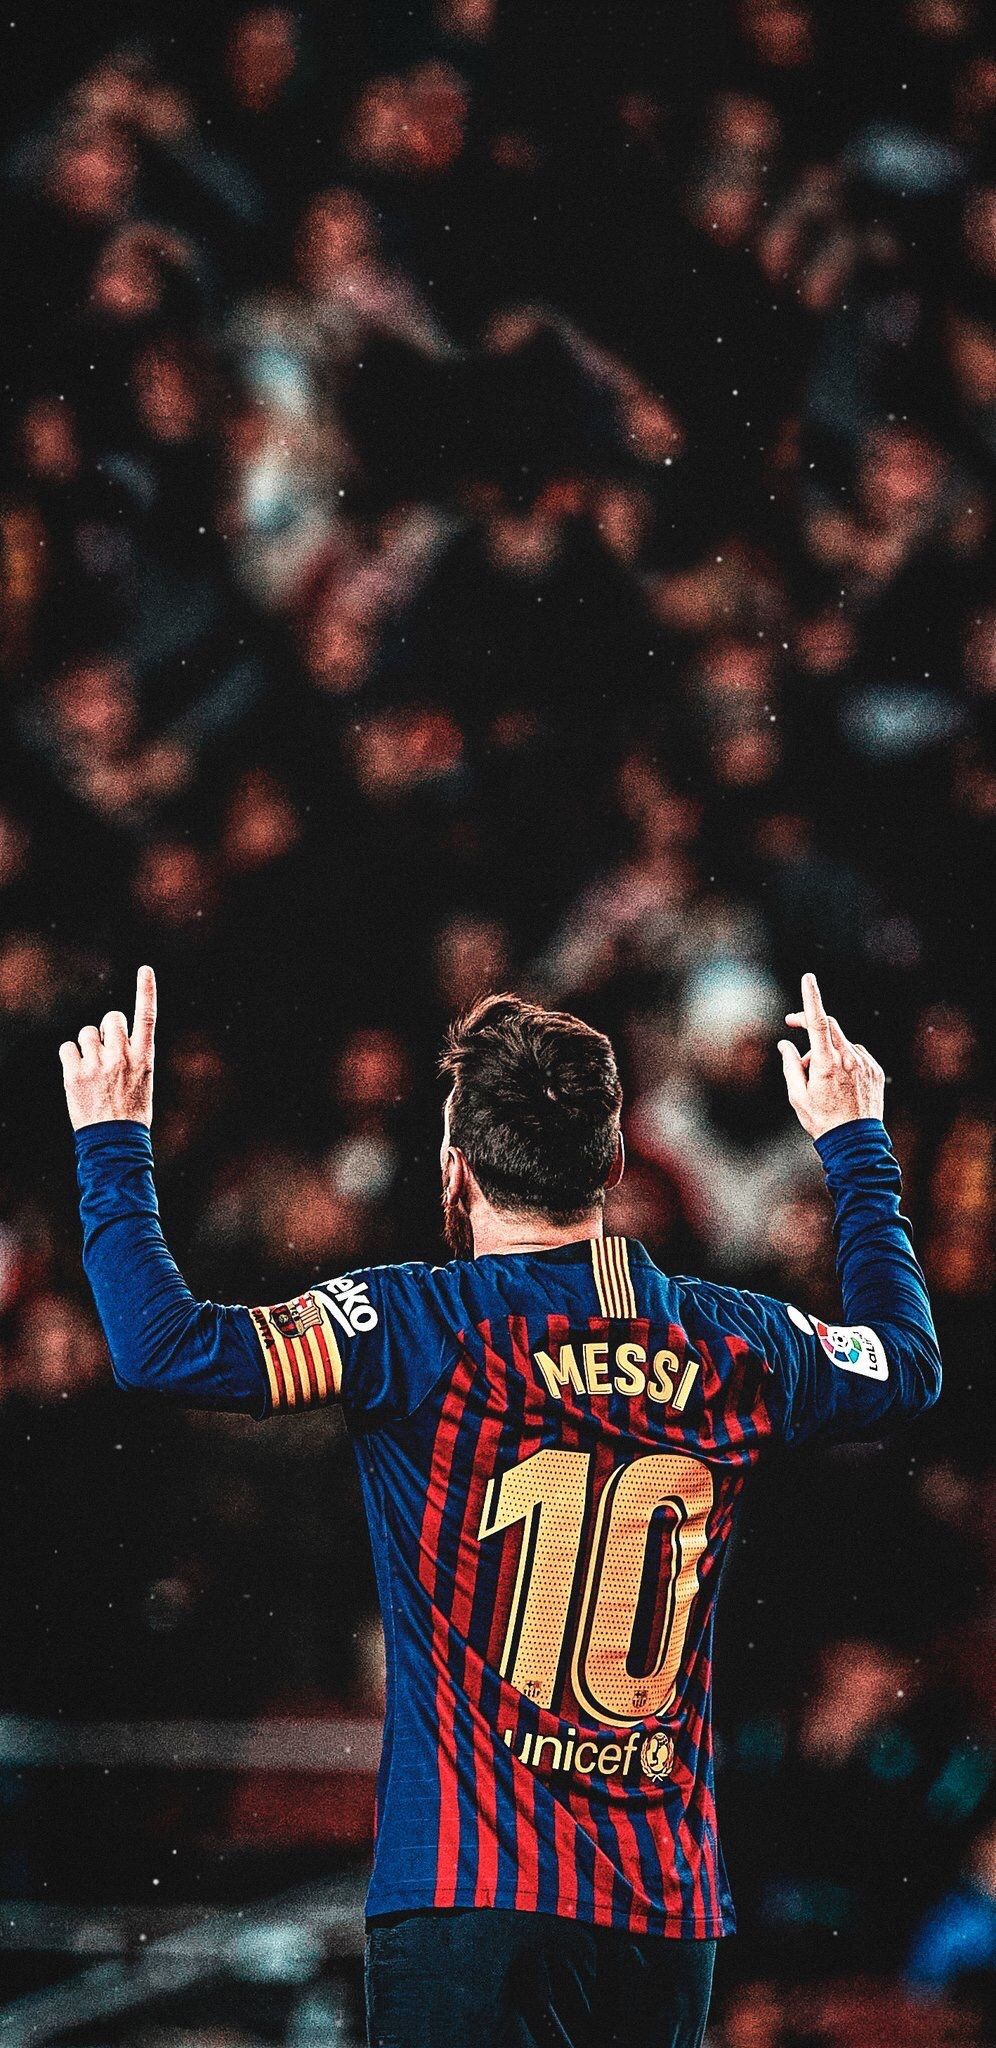 Lionel Messi wallpaper for iPhone and Android. - Messi